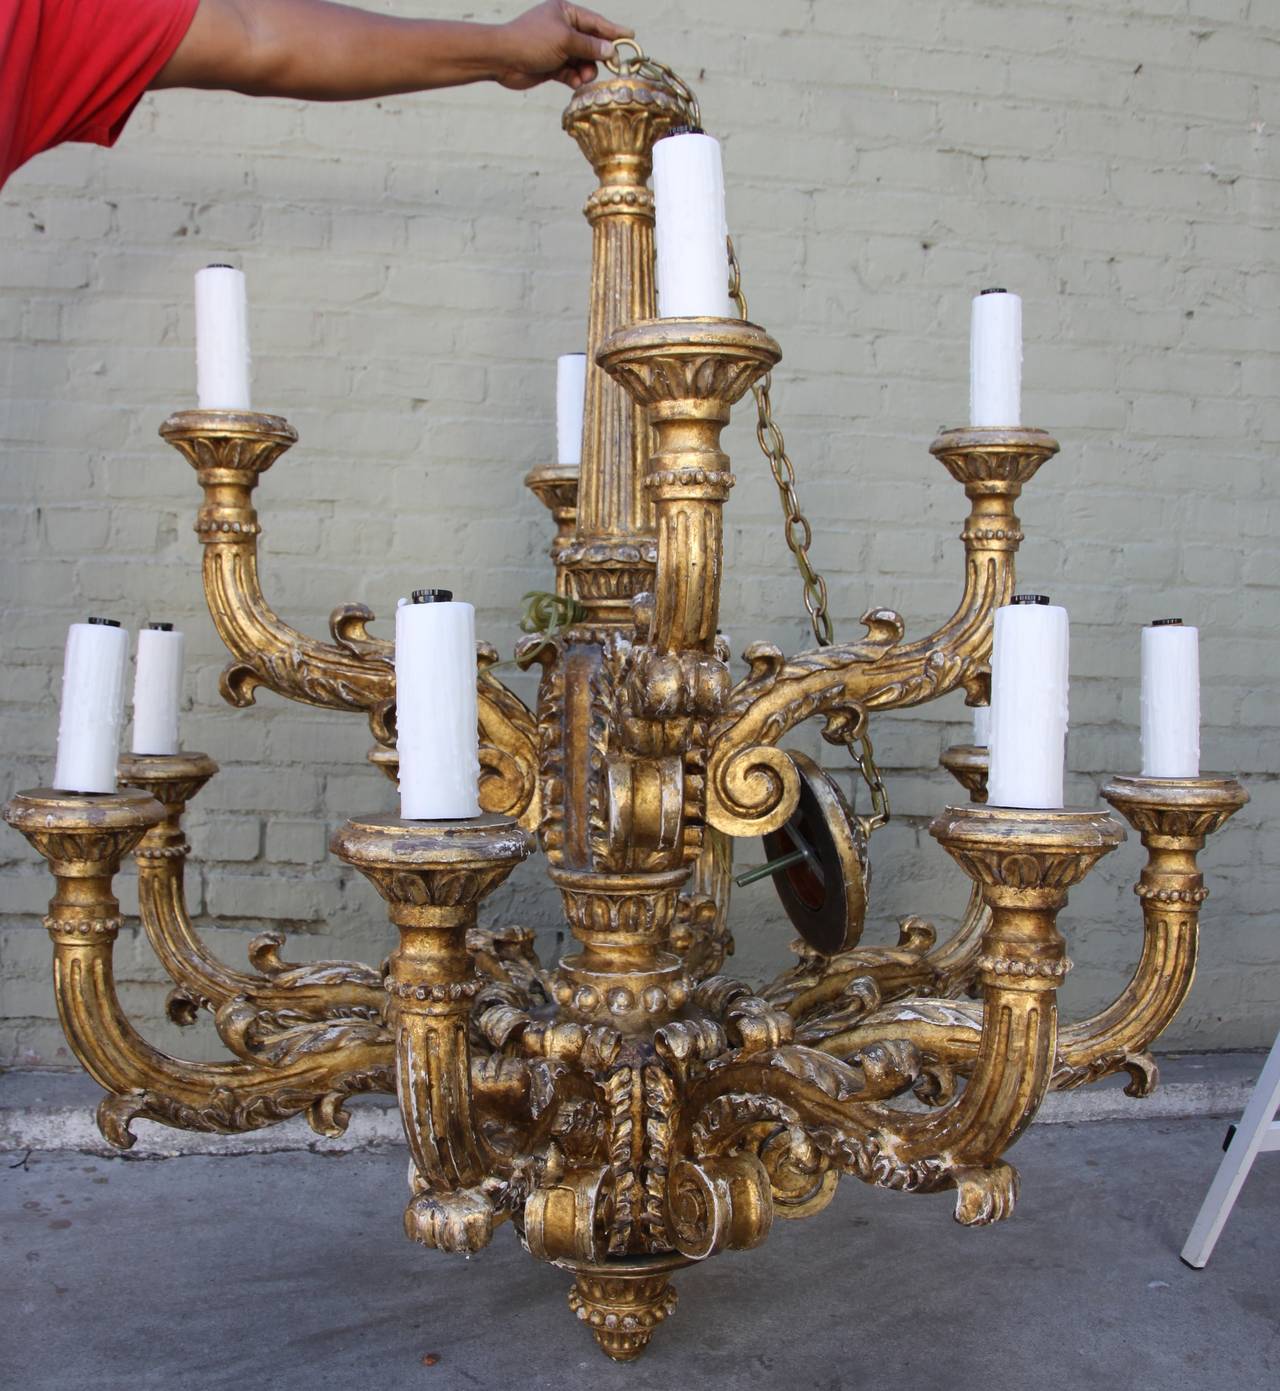 Monumental Italian fourteen-light two-tier giltwood chandelier. Newly wired with wax candle covers.